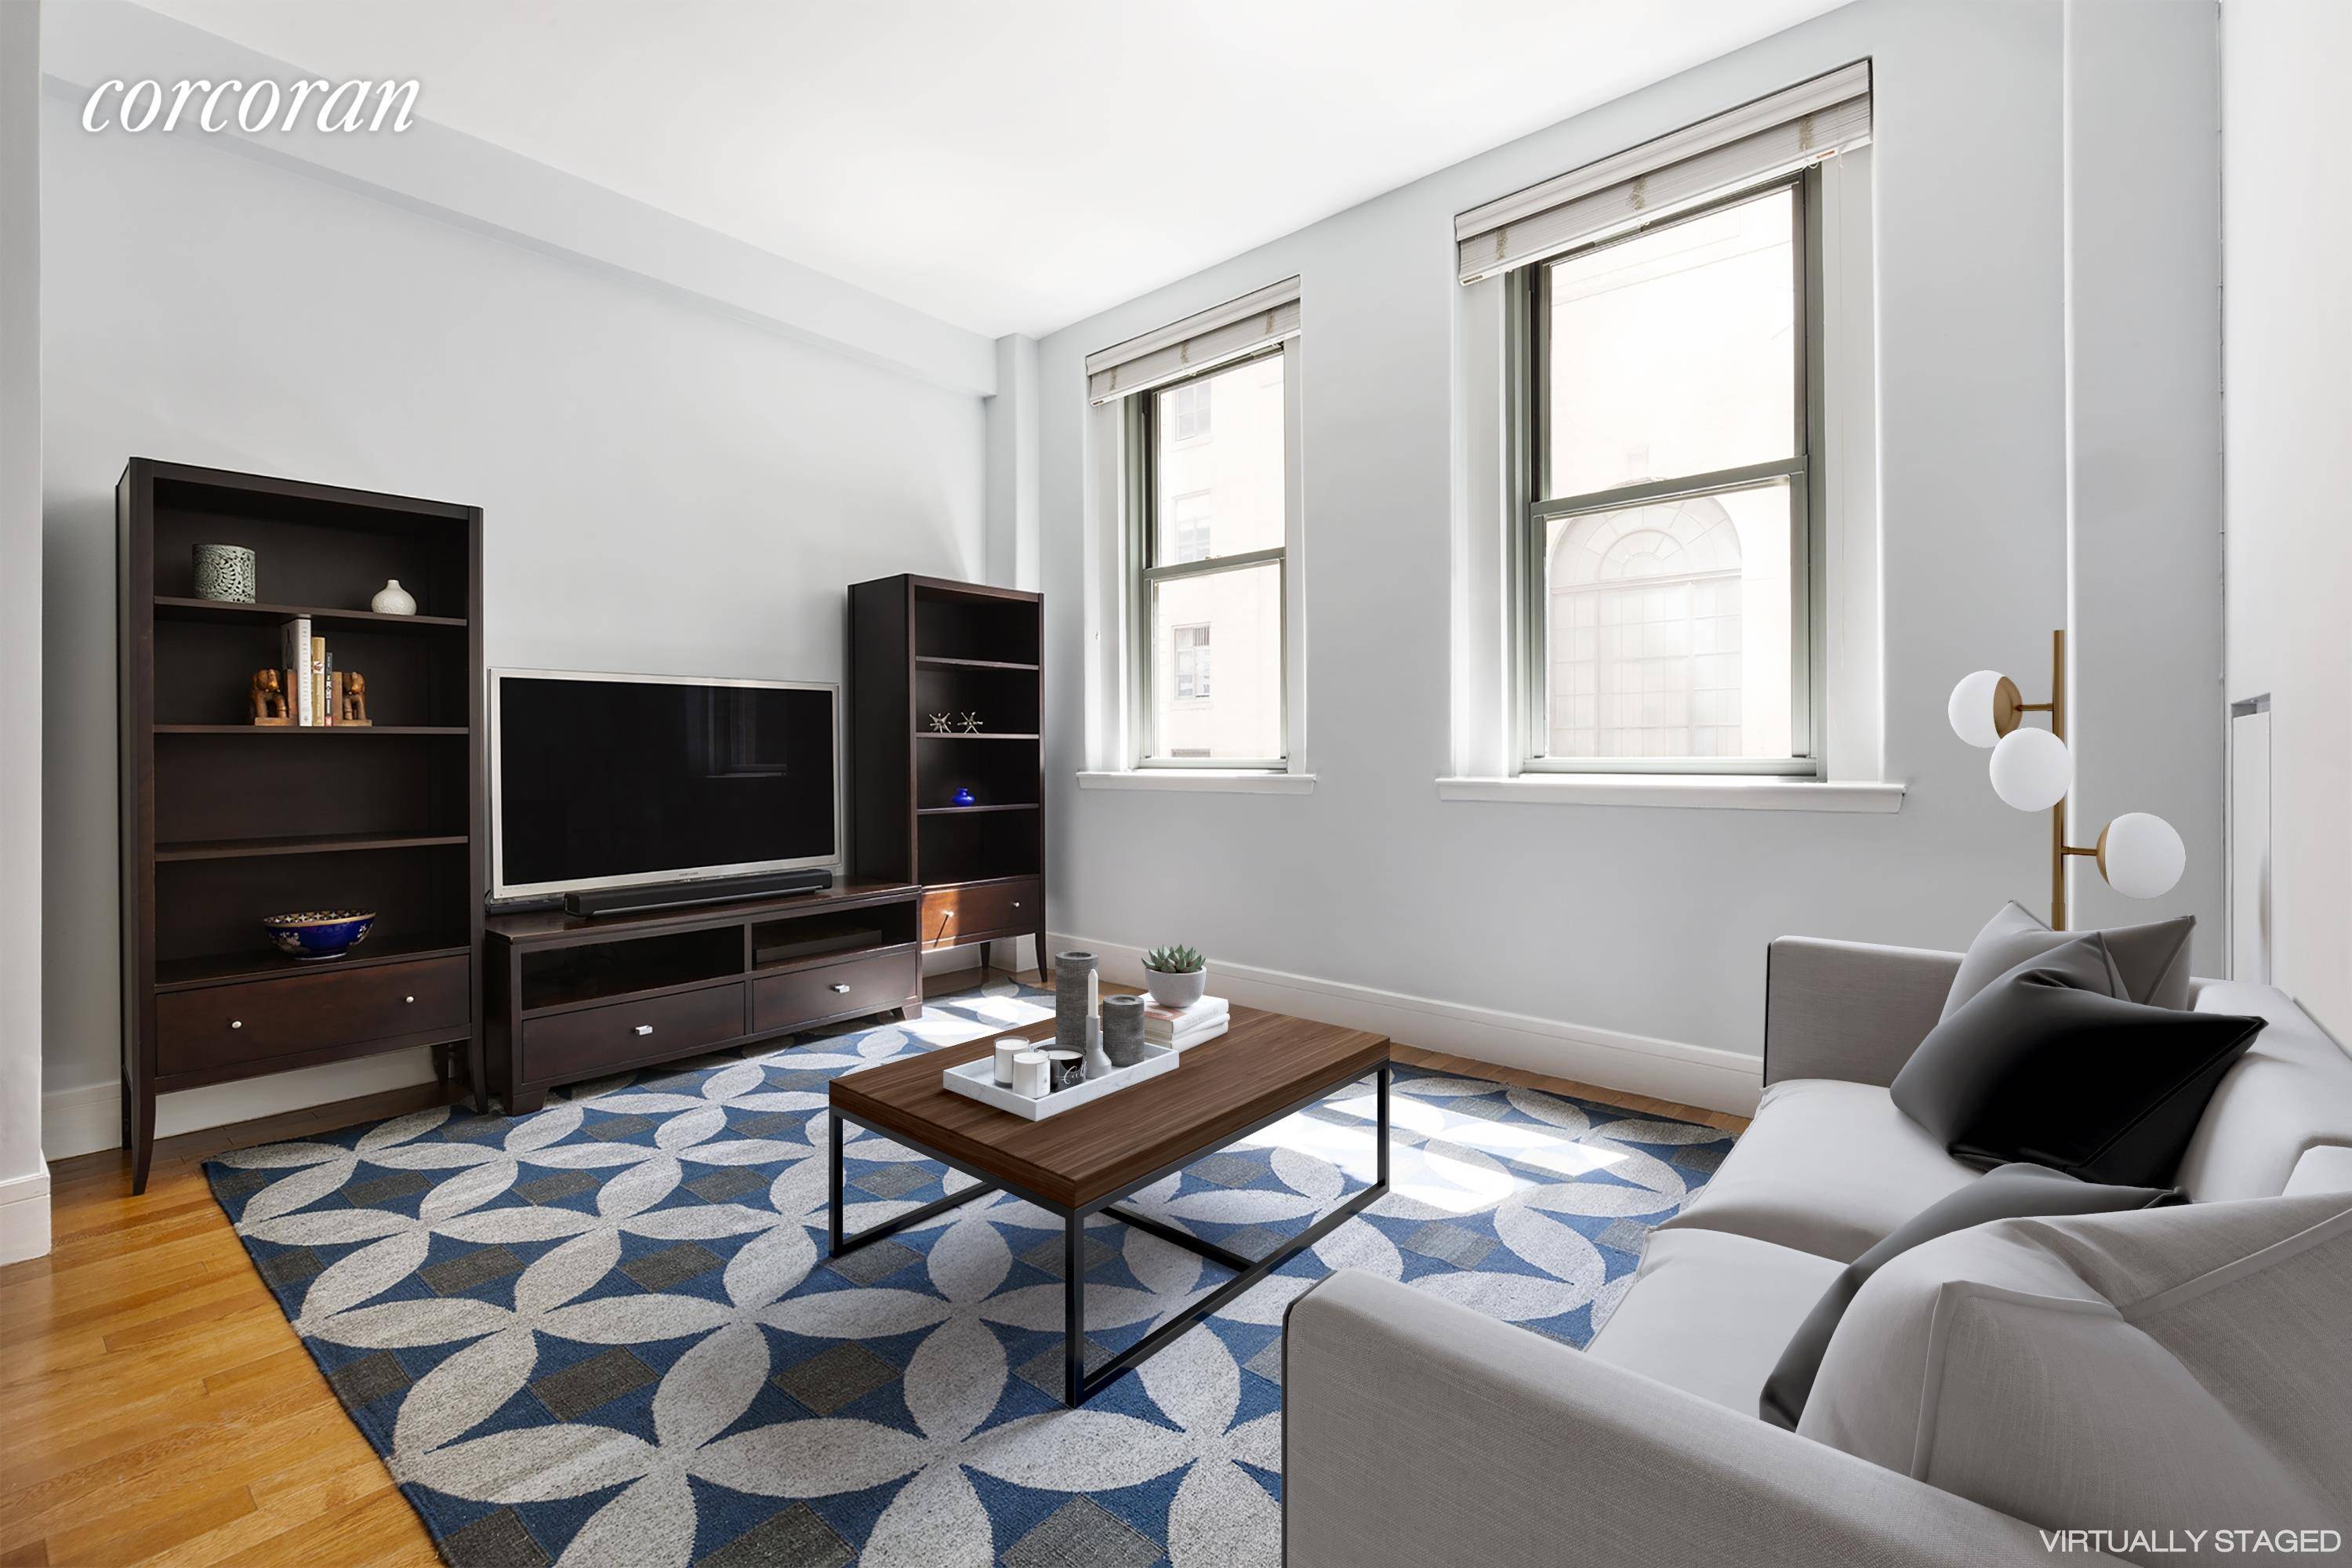 120 Greenwich St, residence 4E is a bright and airy one bedroom apartment, located one block away from the new Freedom Tower World Trade Center.